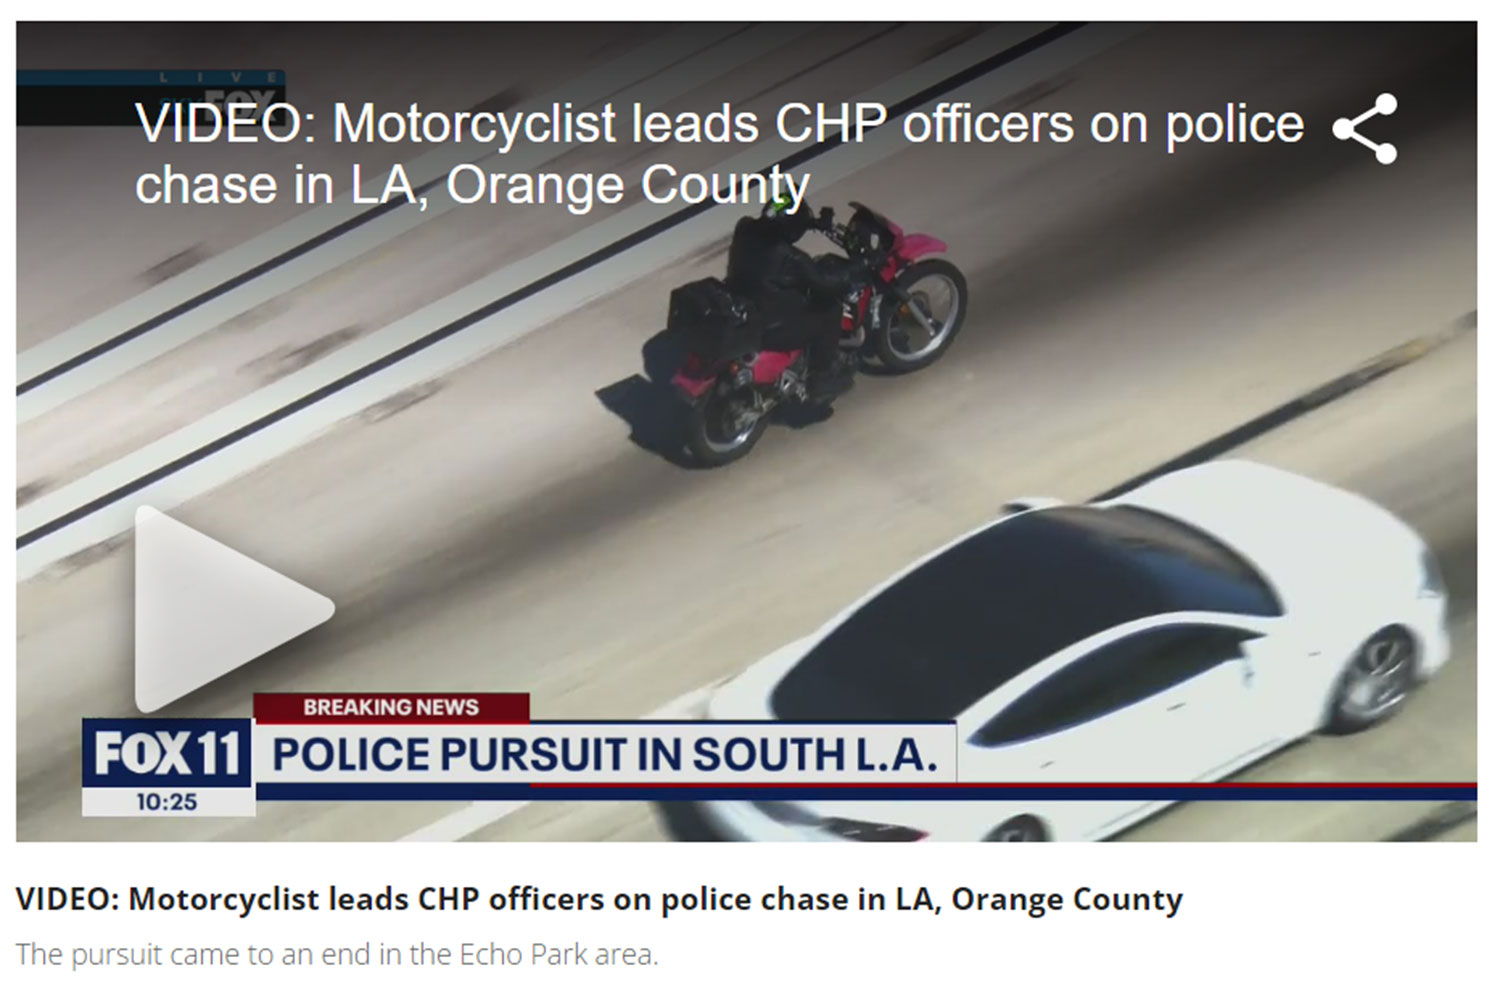 Police Chase Motorcyclist Through 2 Counties In California Motorcycle News